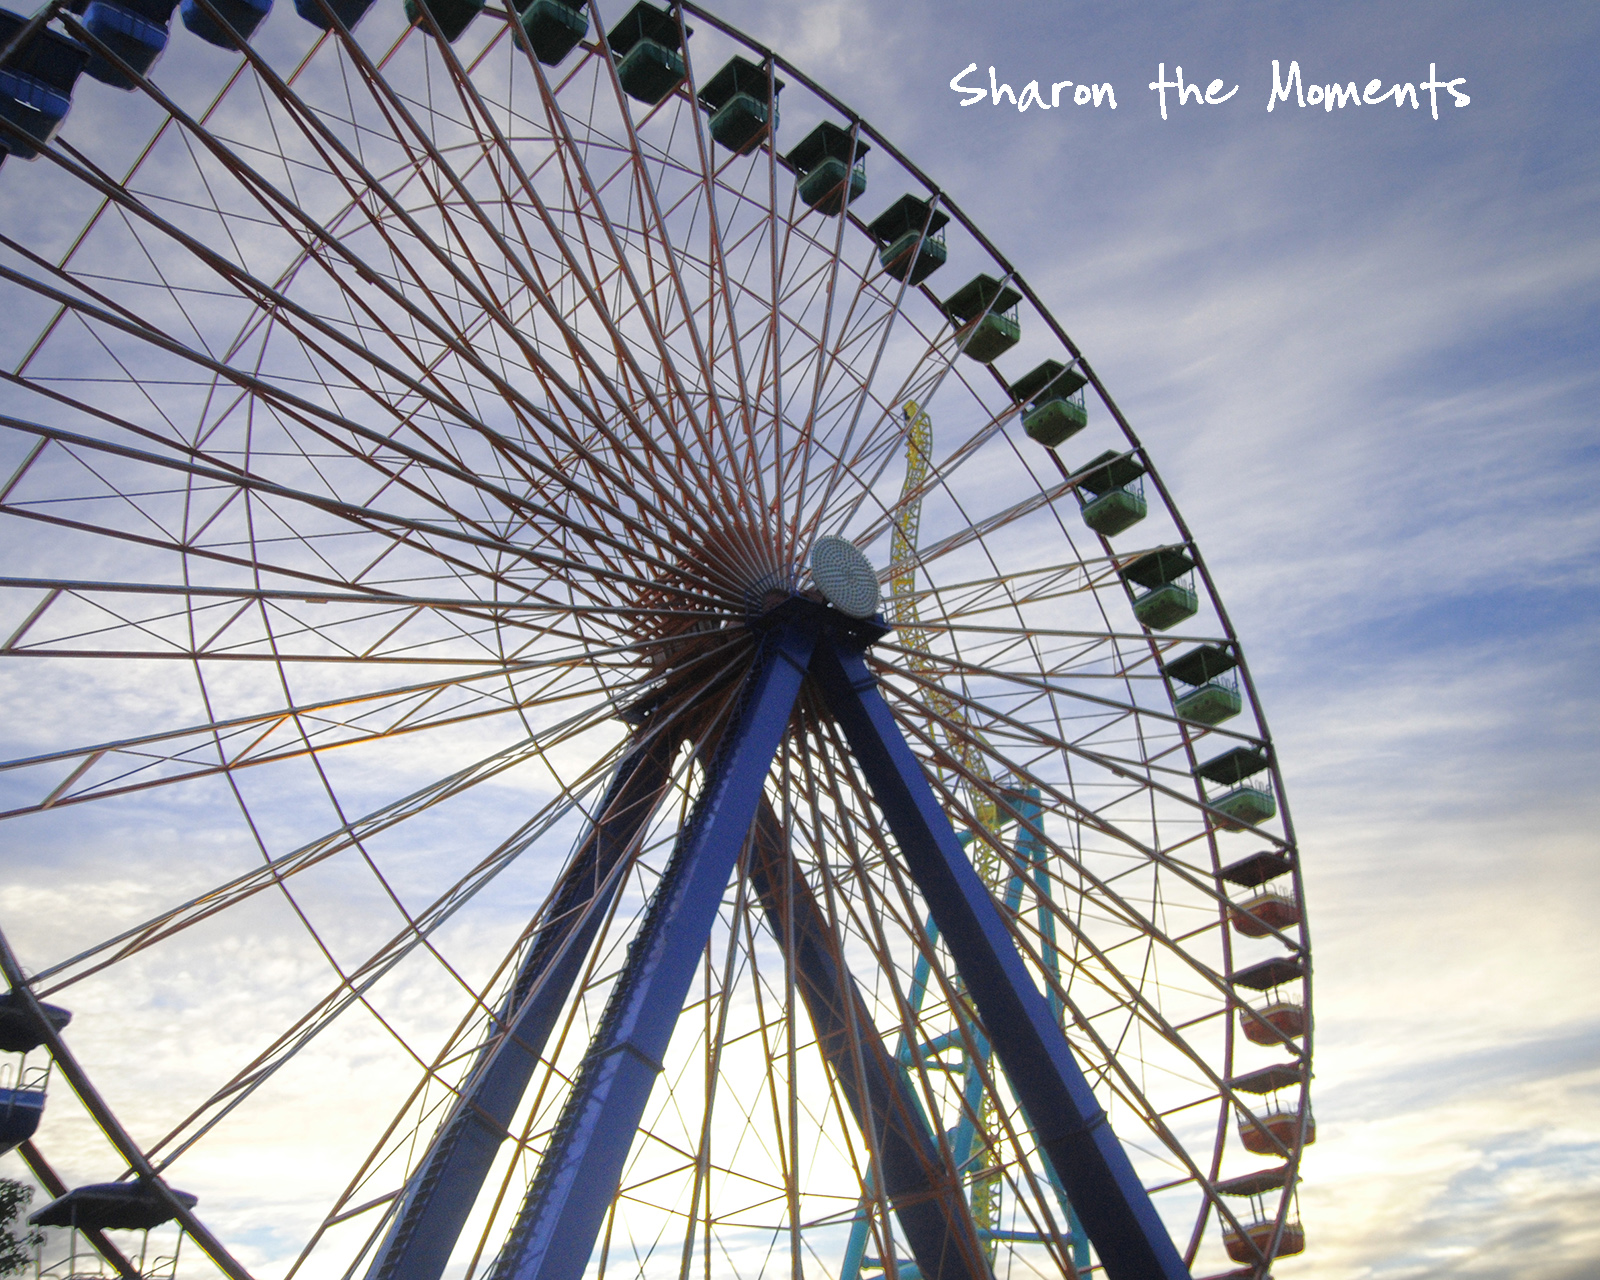 Cedar Point Sandusky Ohio is more than just for Bloggers|Sharon the Moments blog